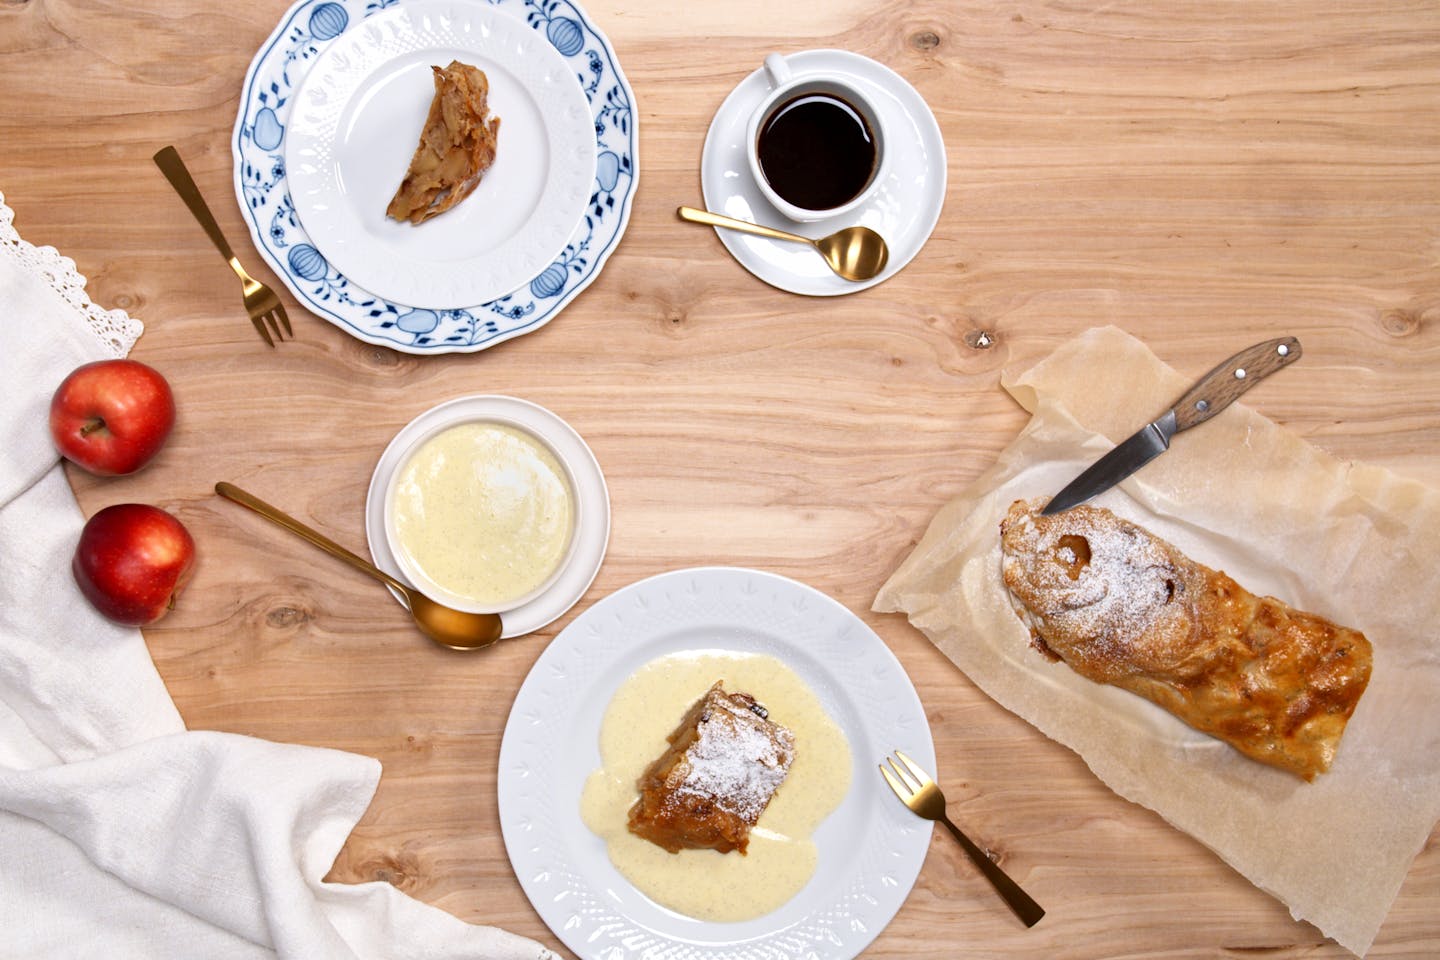 Apple strudel With vanilla sauce on 2 plates, served with coffee and the remaining apple strudel on baking paper